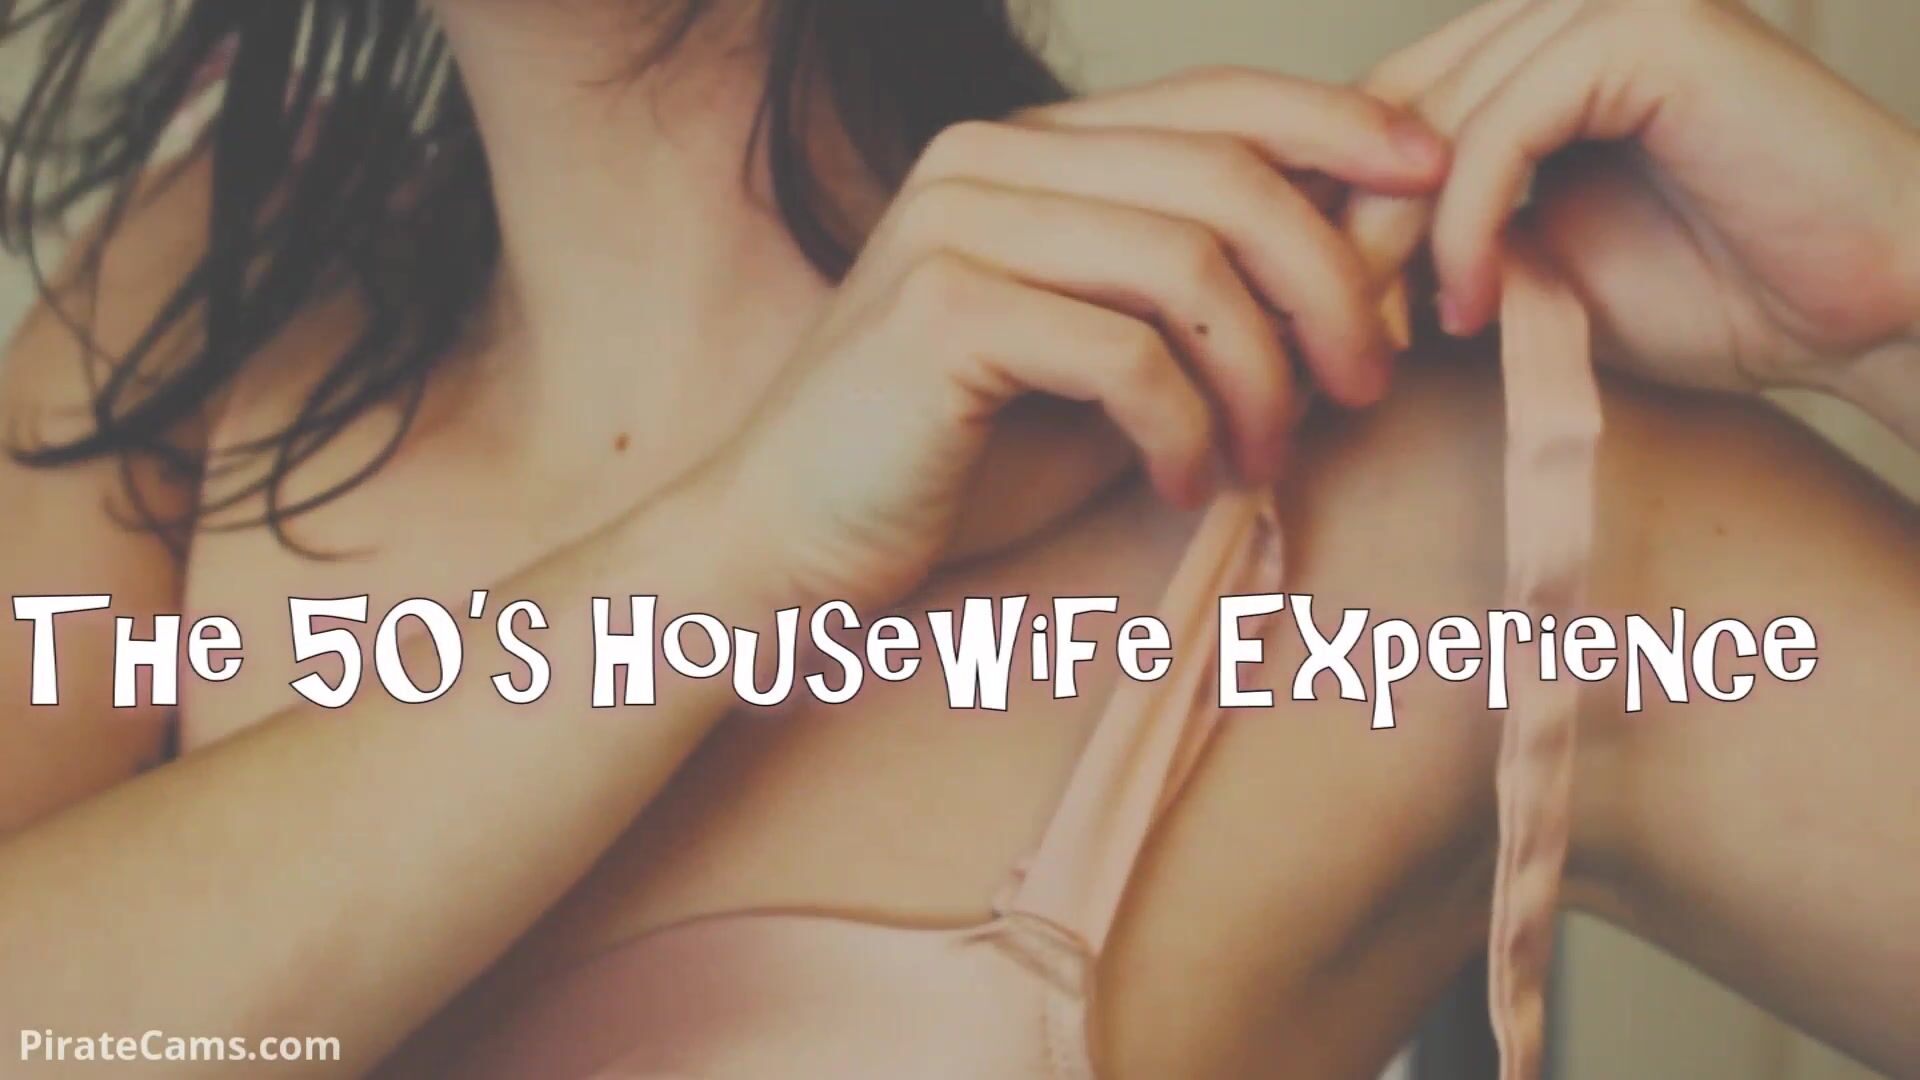 The 50s housewife experience POV BJ amateur nude porn video